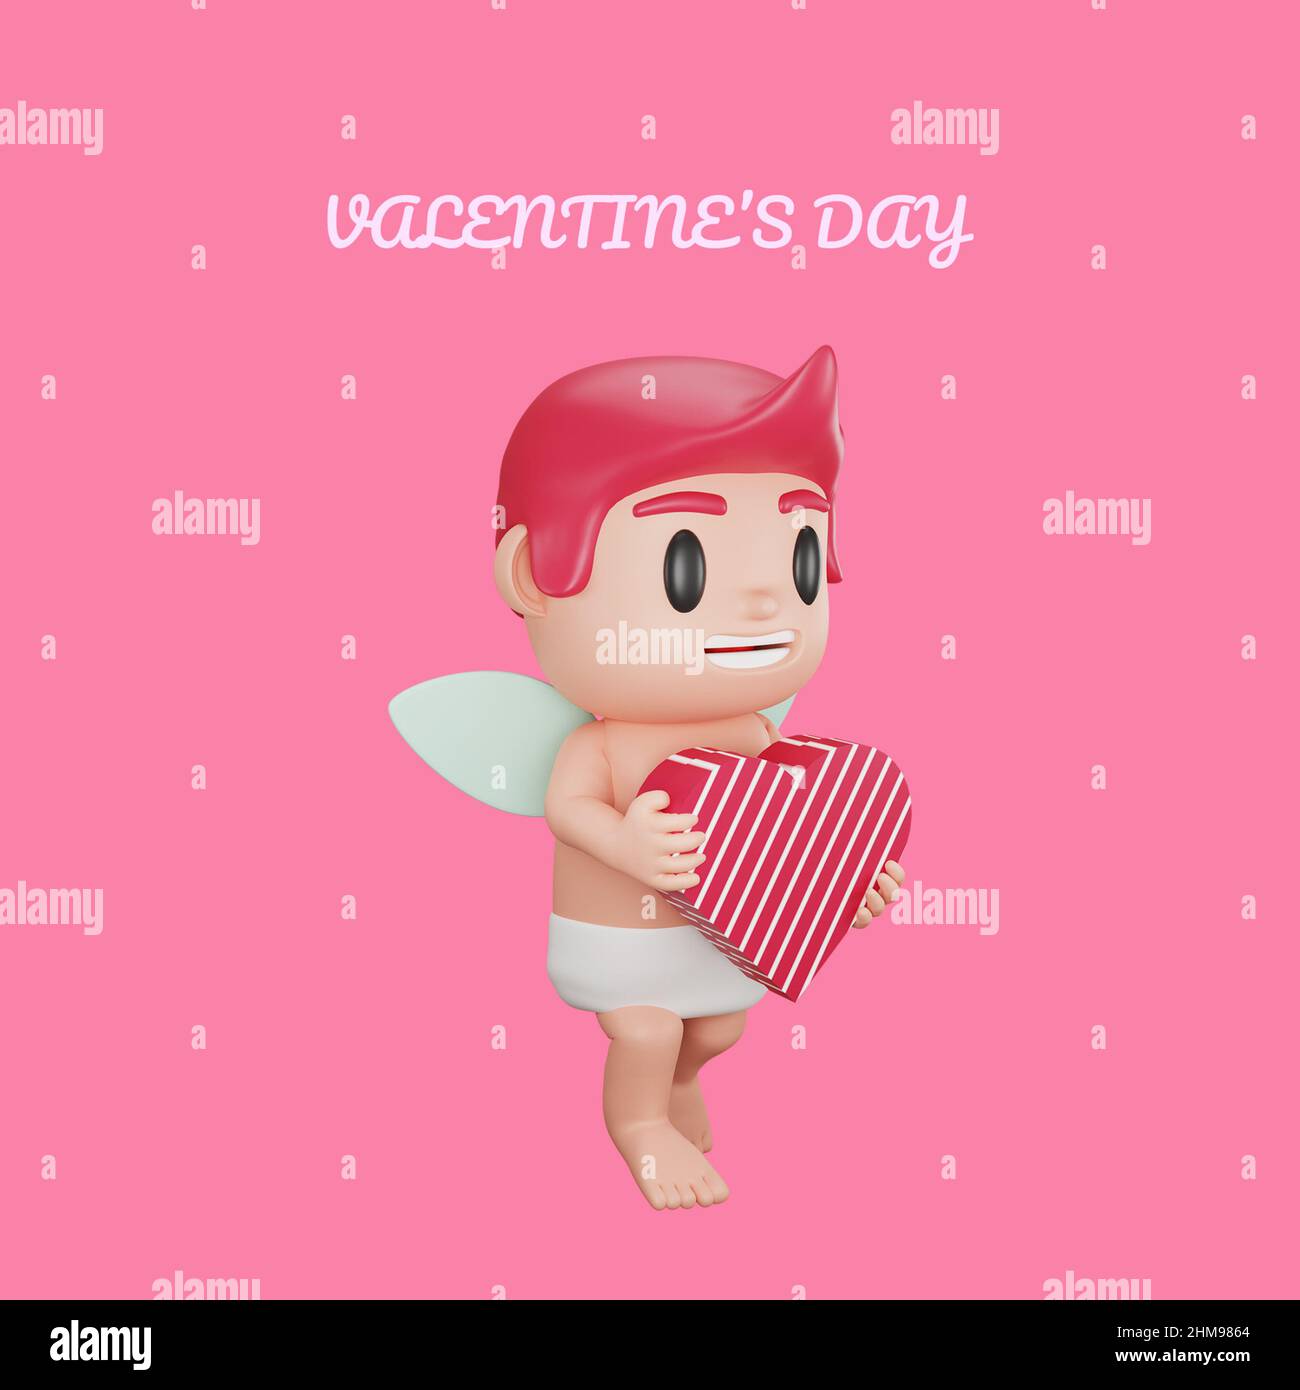 3d rendering of cupid character valentine's day concept Stock Photo